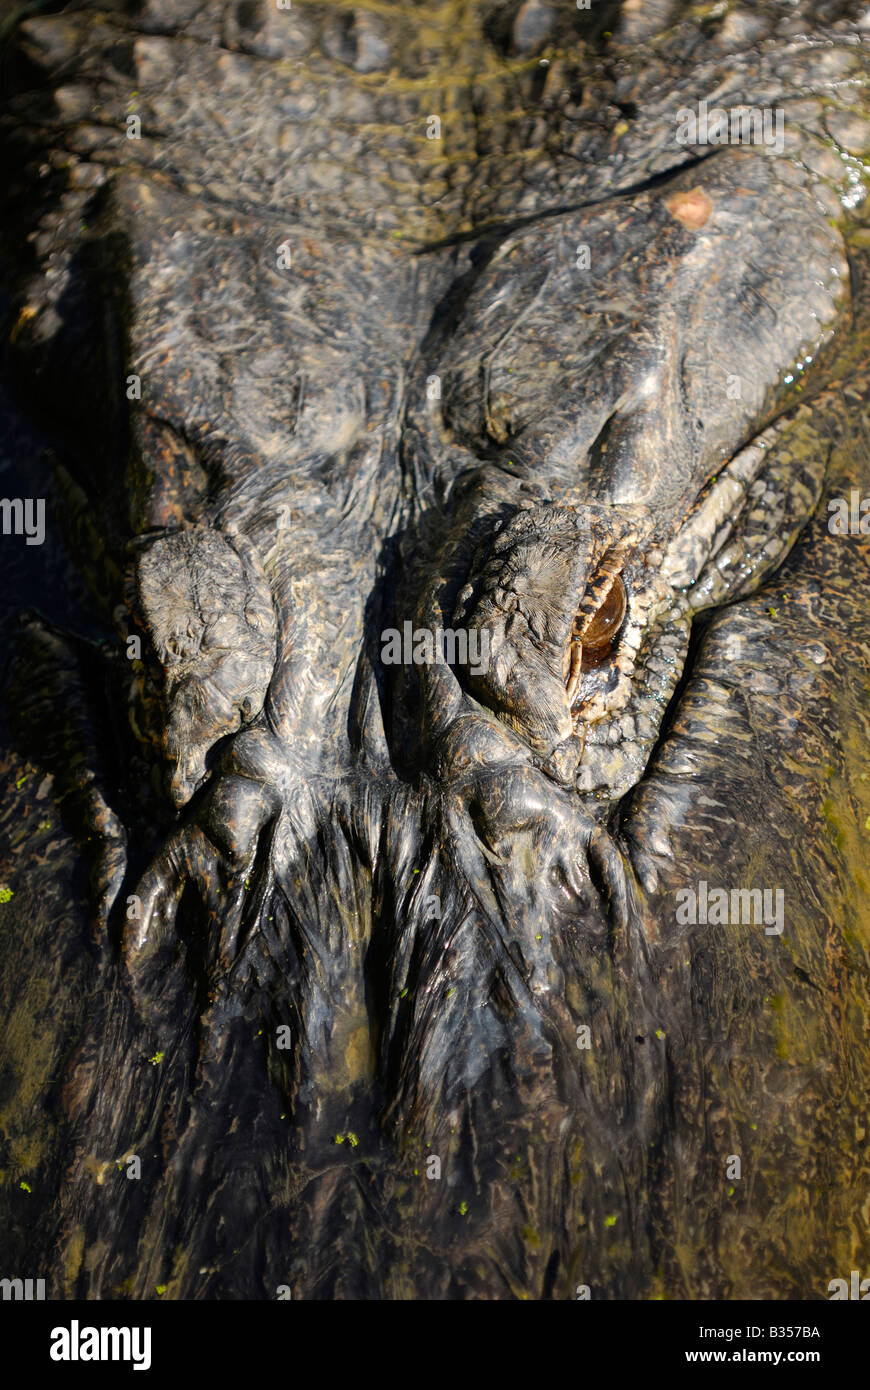 Close up of an alligator peeking out of water Stock Photo